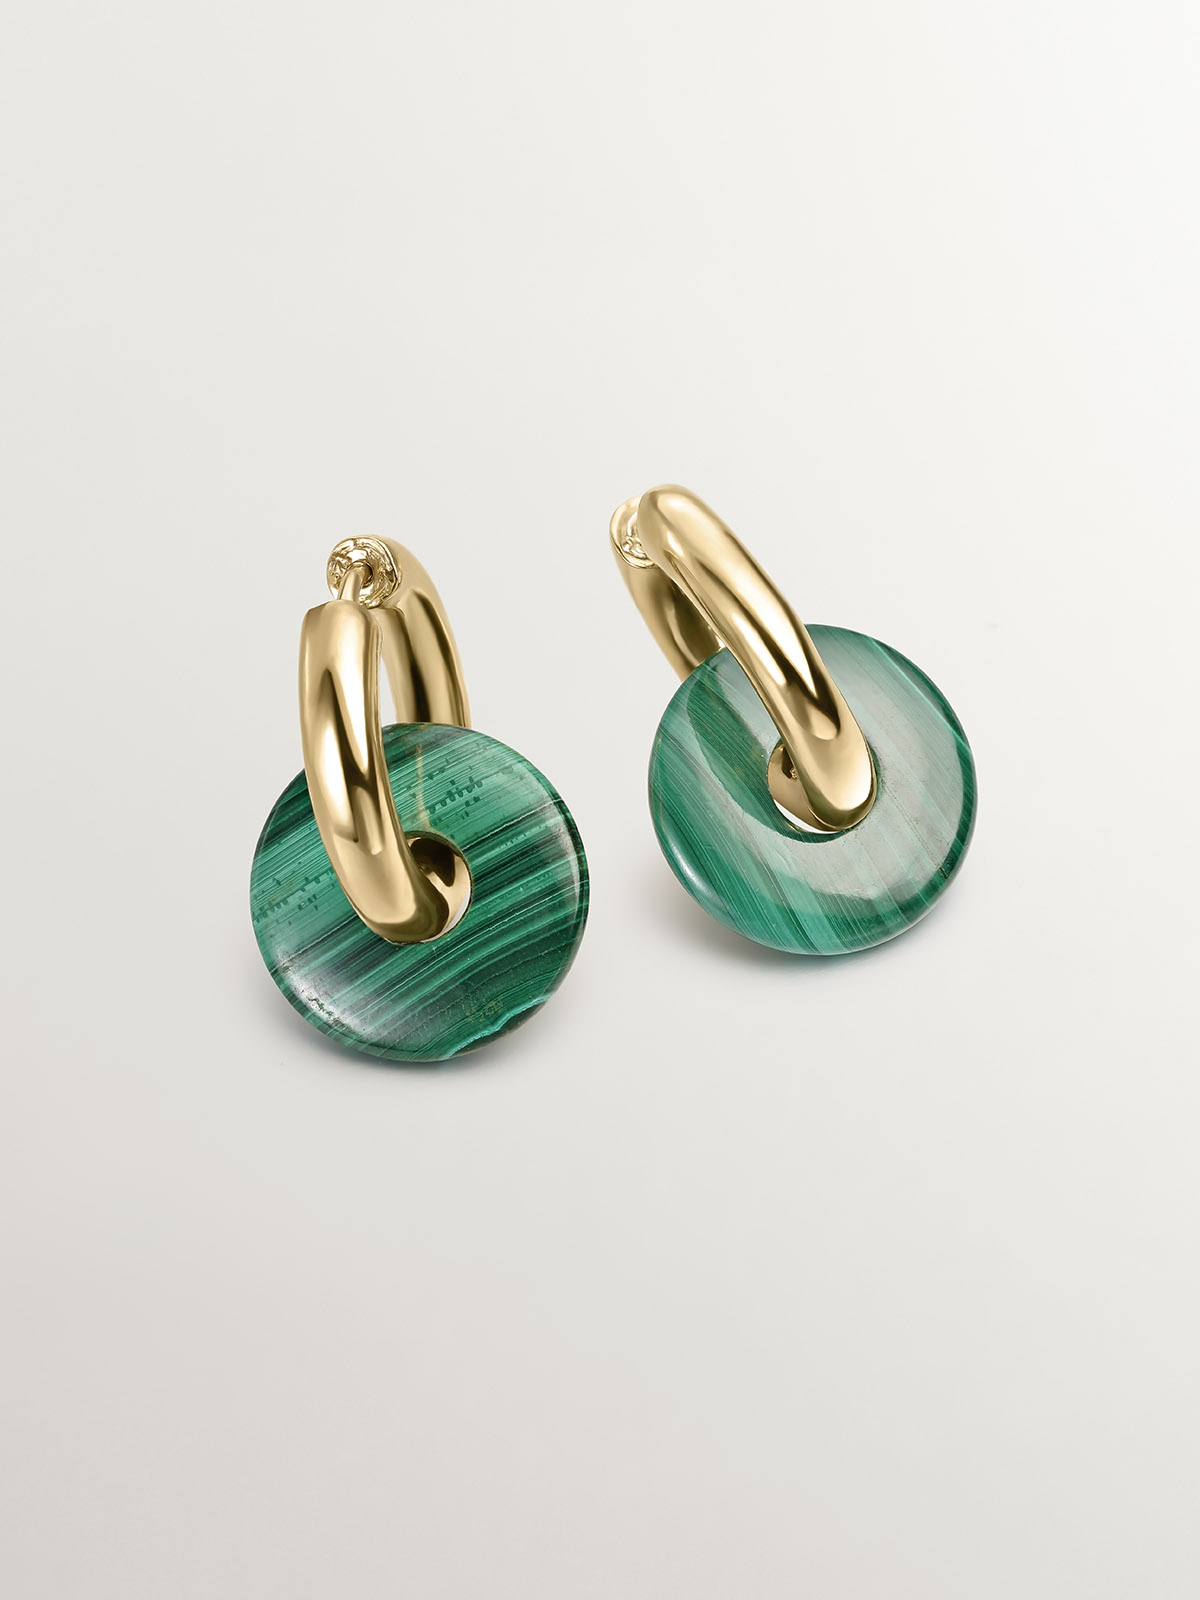 Medium hoop earrings made of 925 silver, gold plated in 18K yellow gold with green malachite.